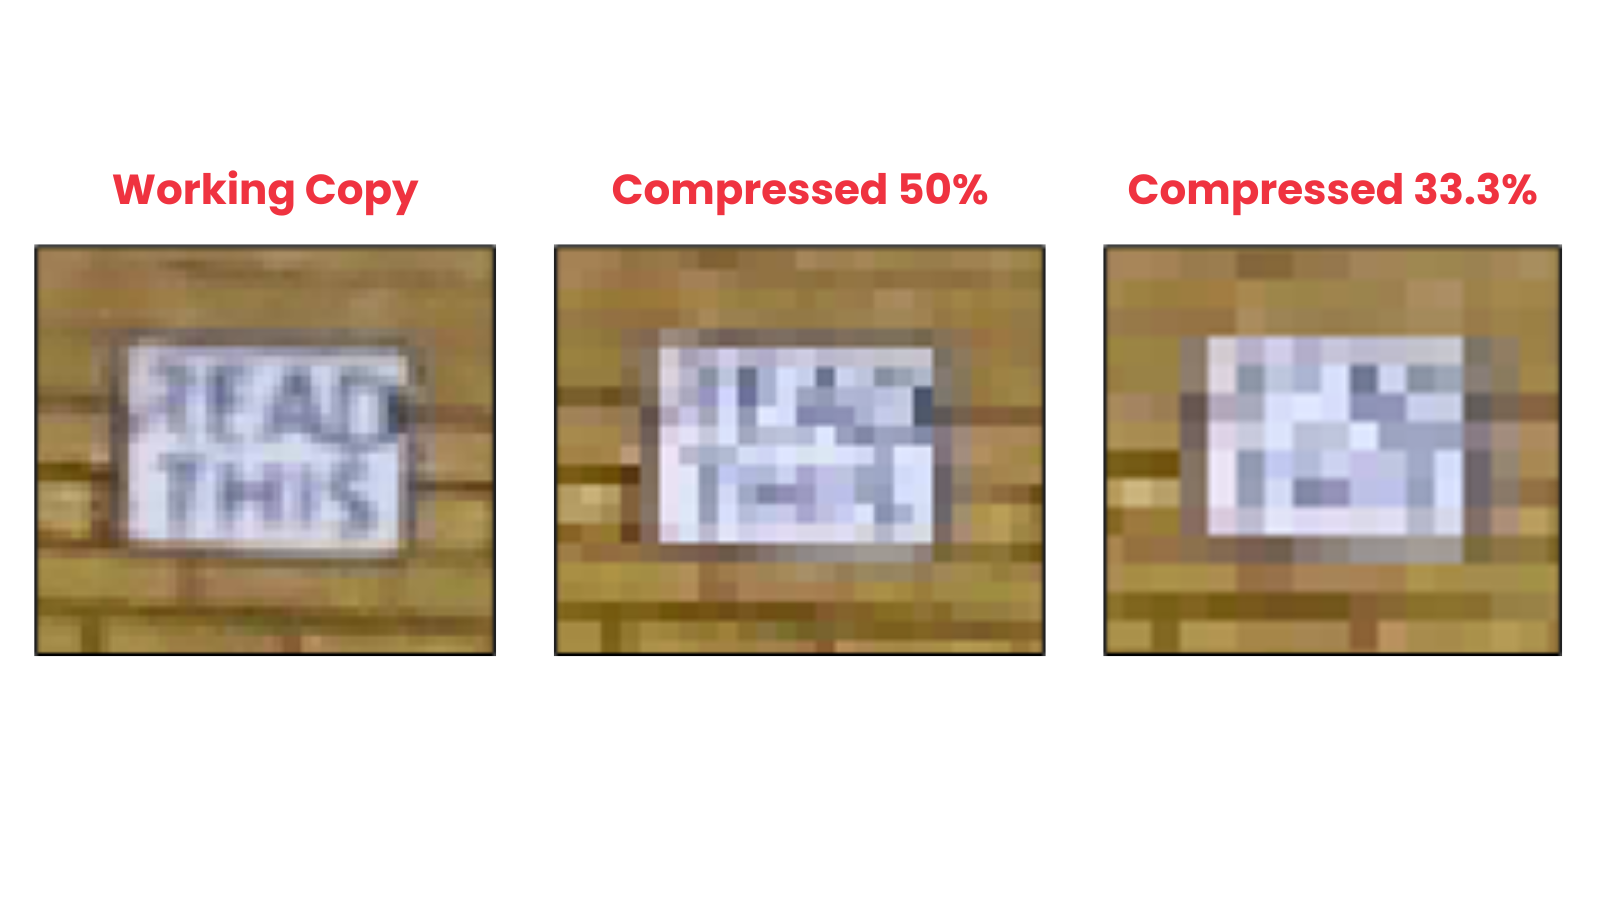 Three images showing the effects of image compression